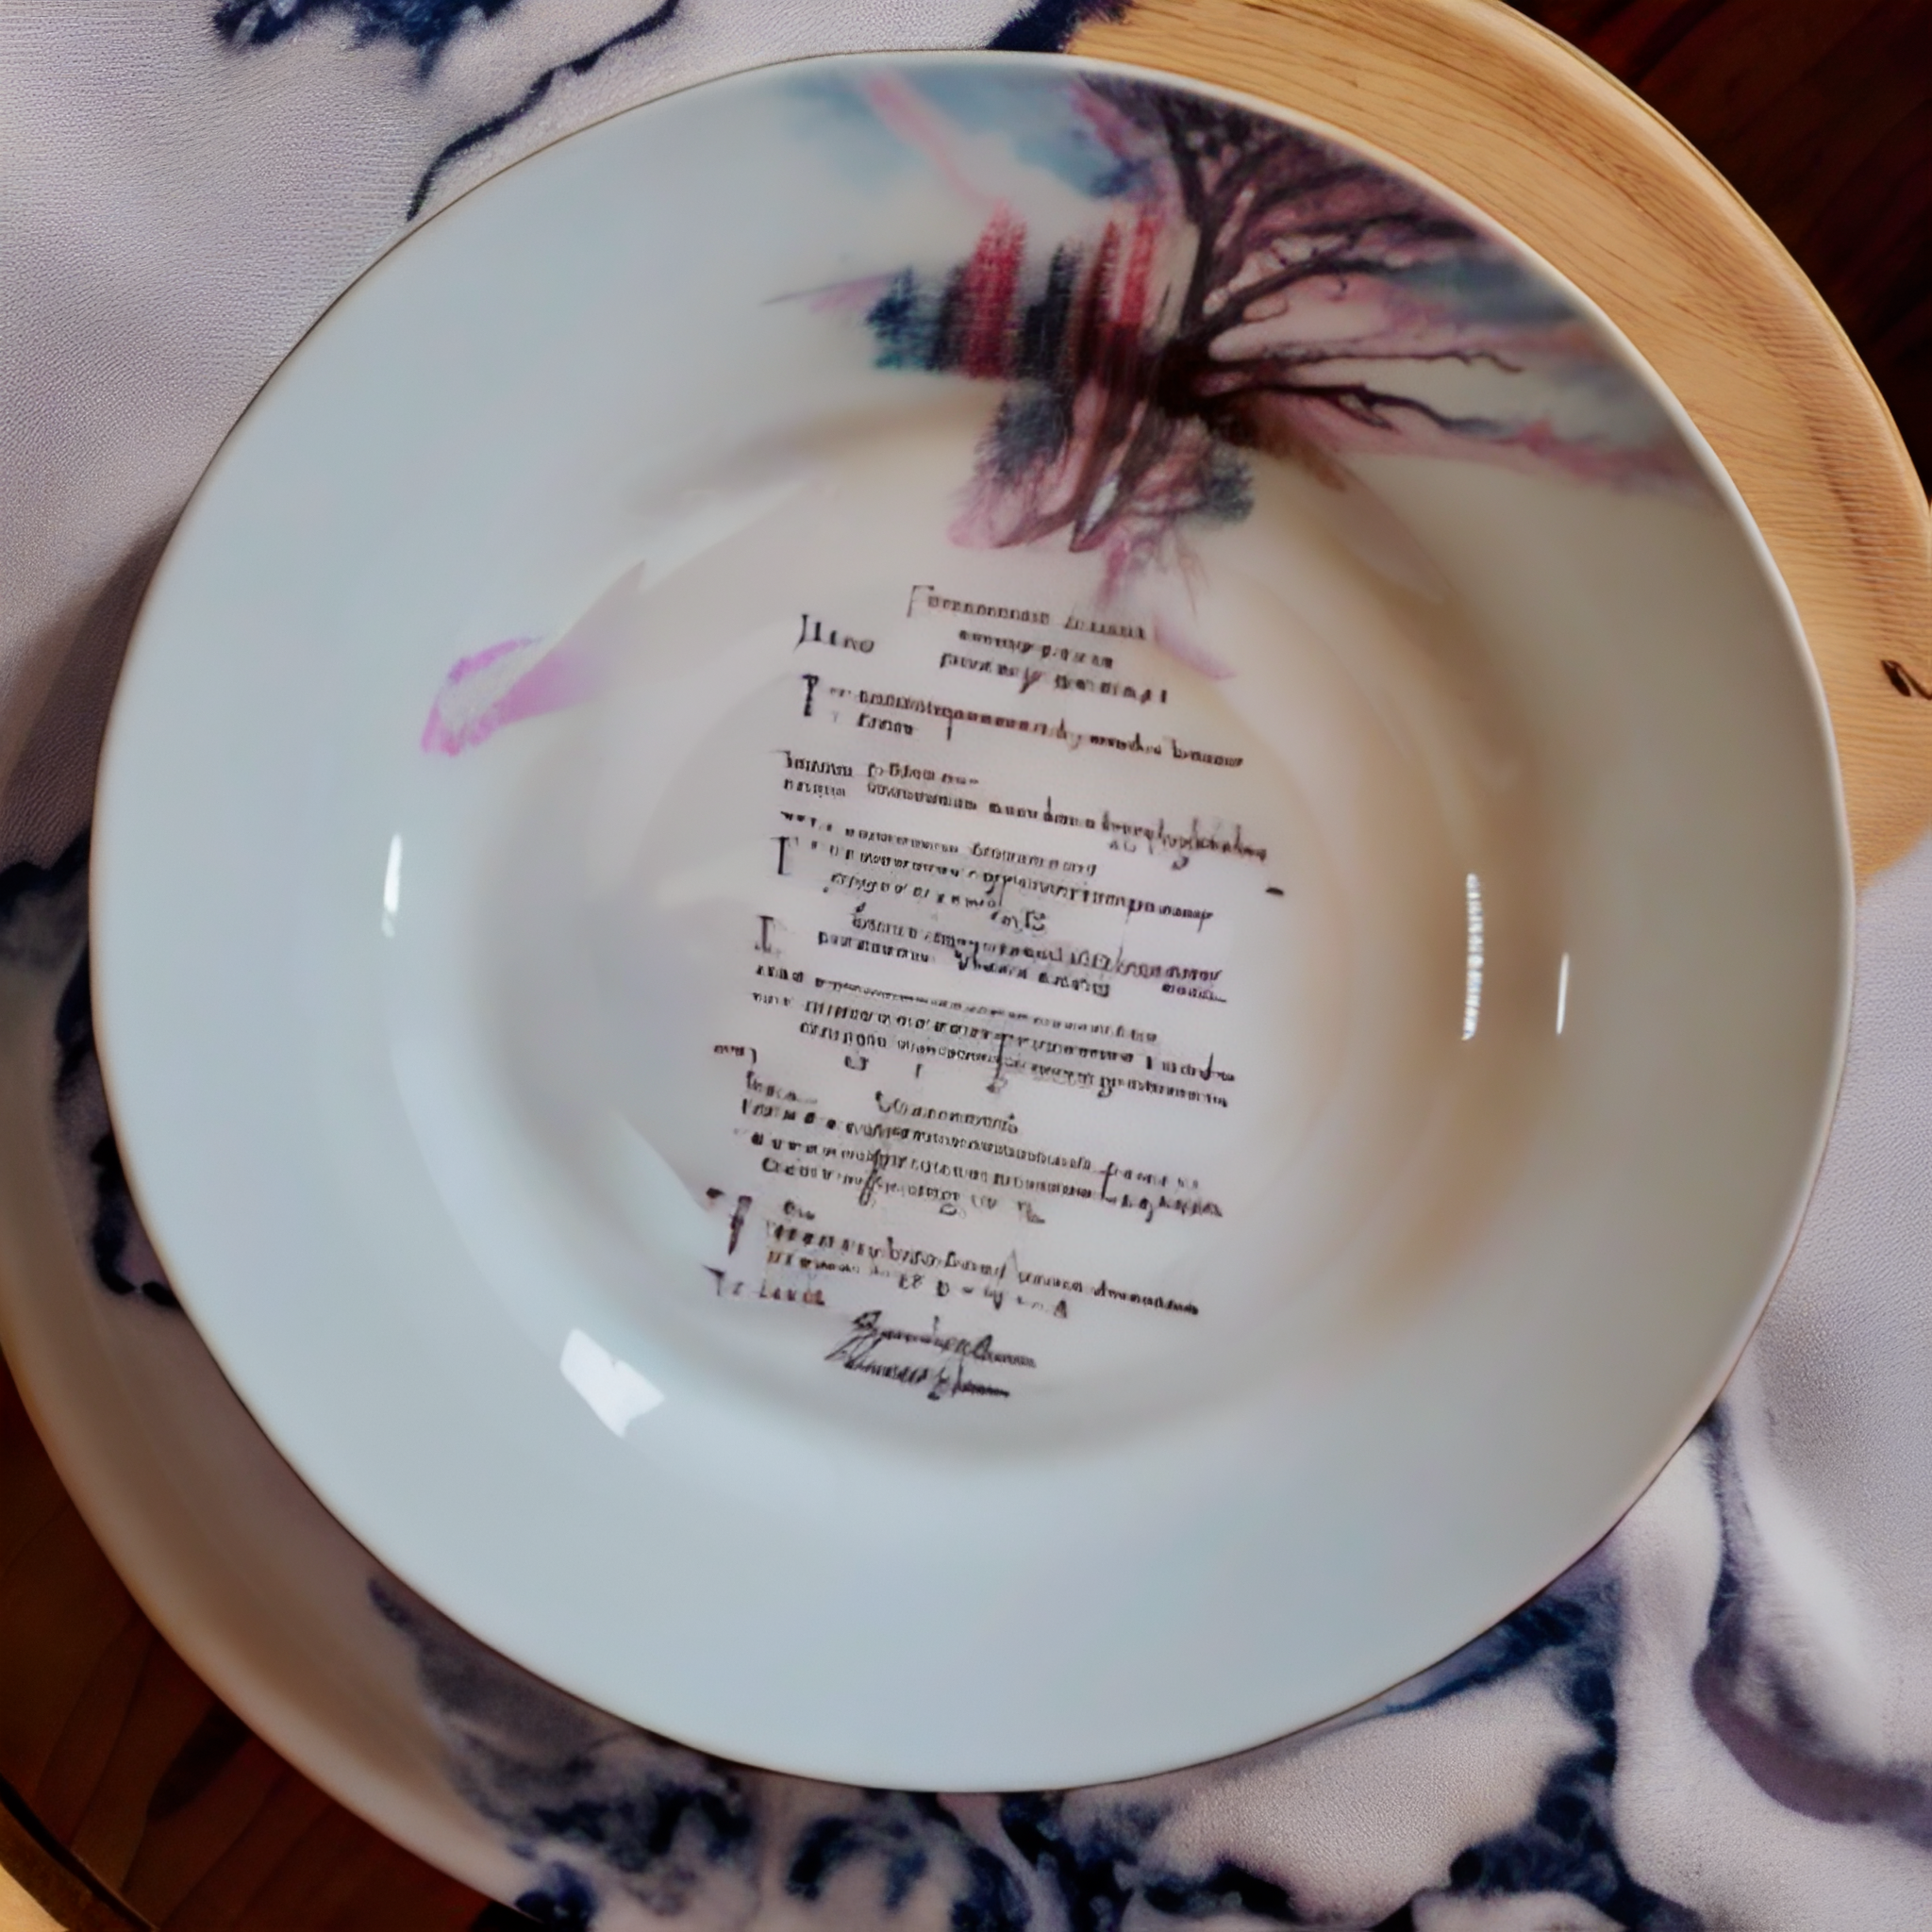 Poetry or Recipes Printed on Shallow Bowls Called Soup Plates